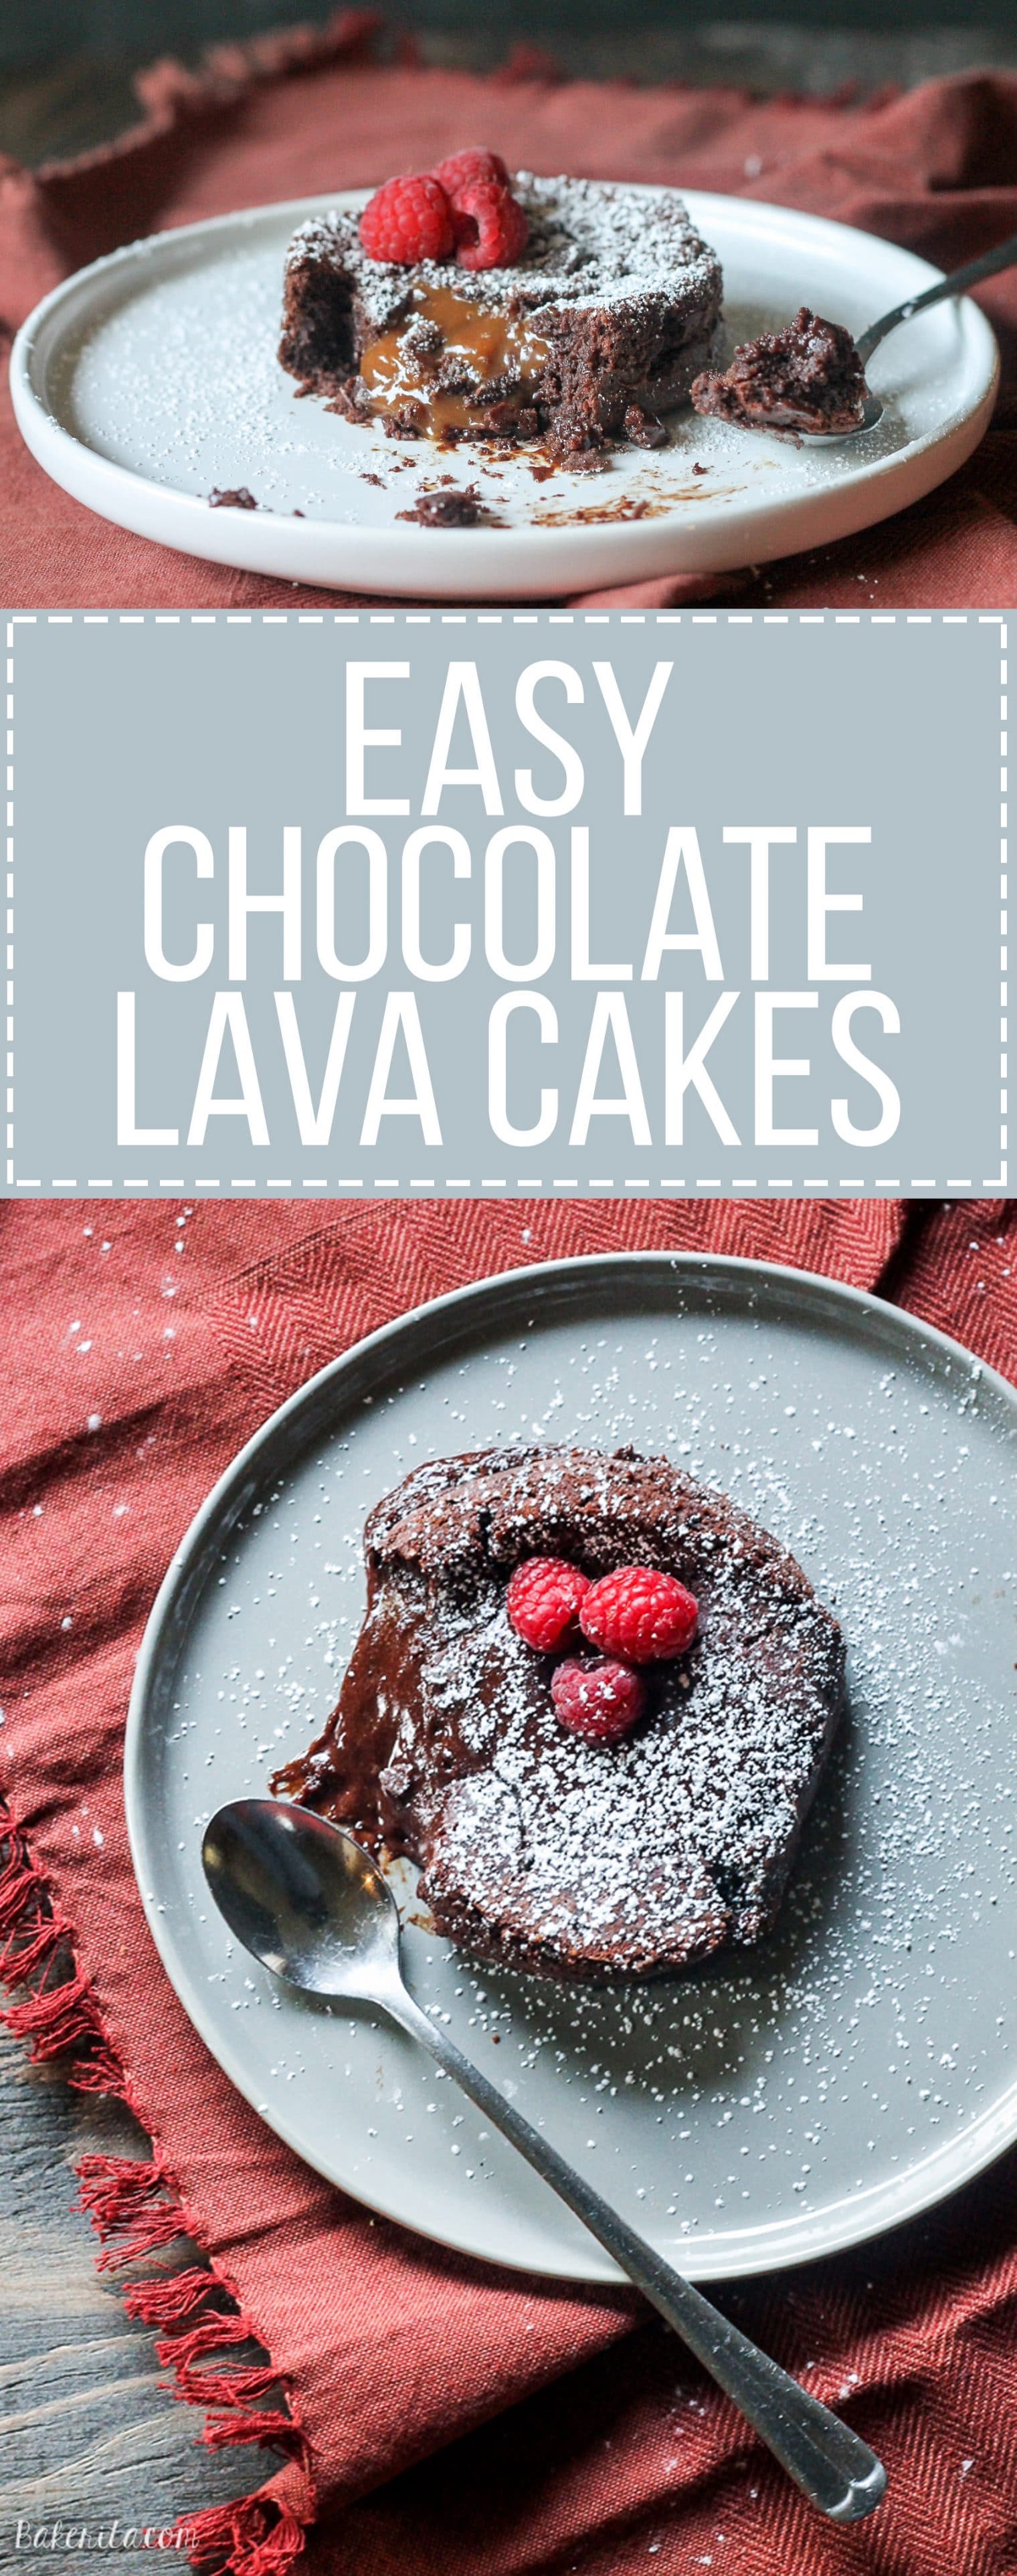 This recipe for Easy Chocolate Lava Cakes for 2 comes together in just 25 minutes with only 6 ingredients! These decadent cakes have a luscious, molten chocolate center and if desired, a dulce de leche surprise.